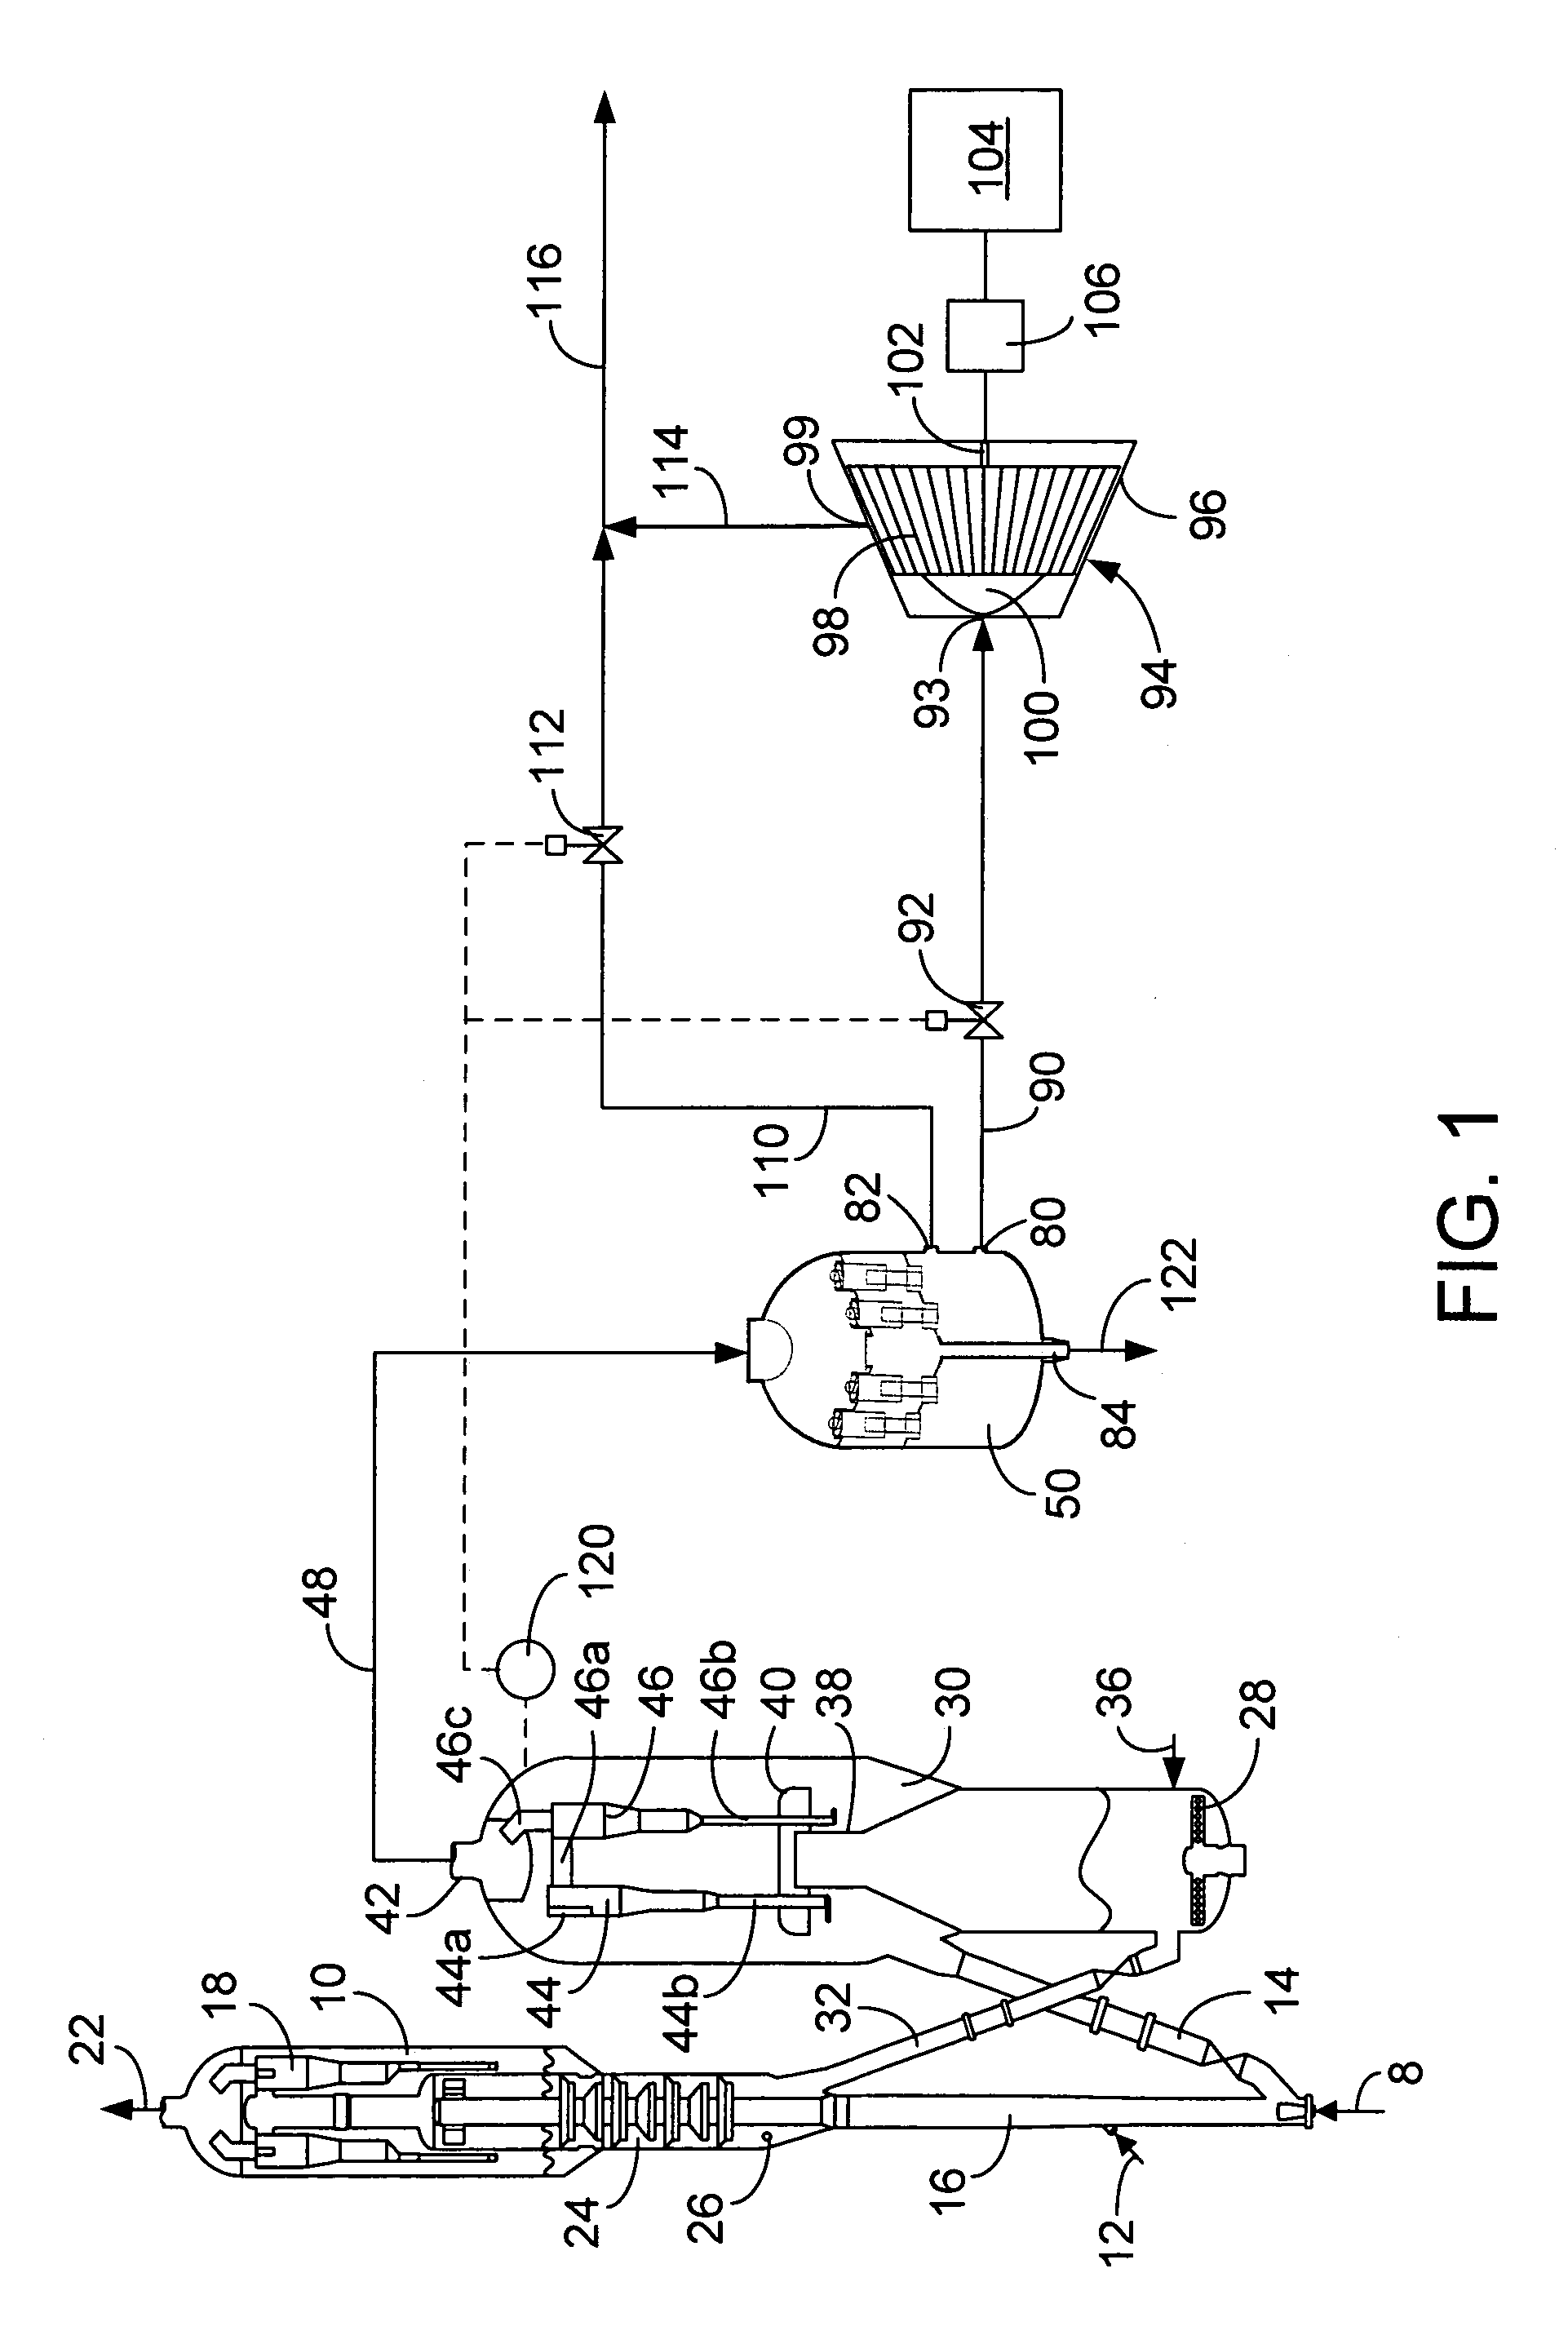 Apparatus and process for power recovery